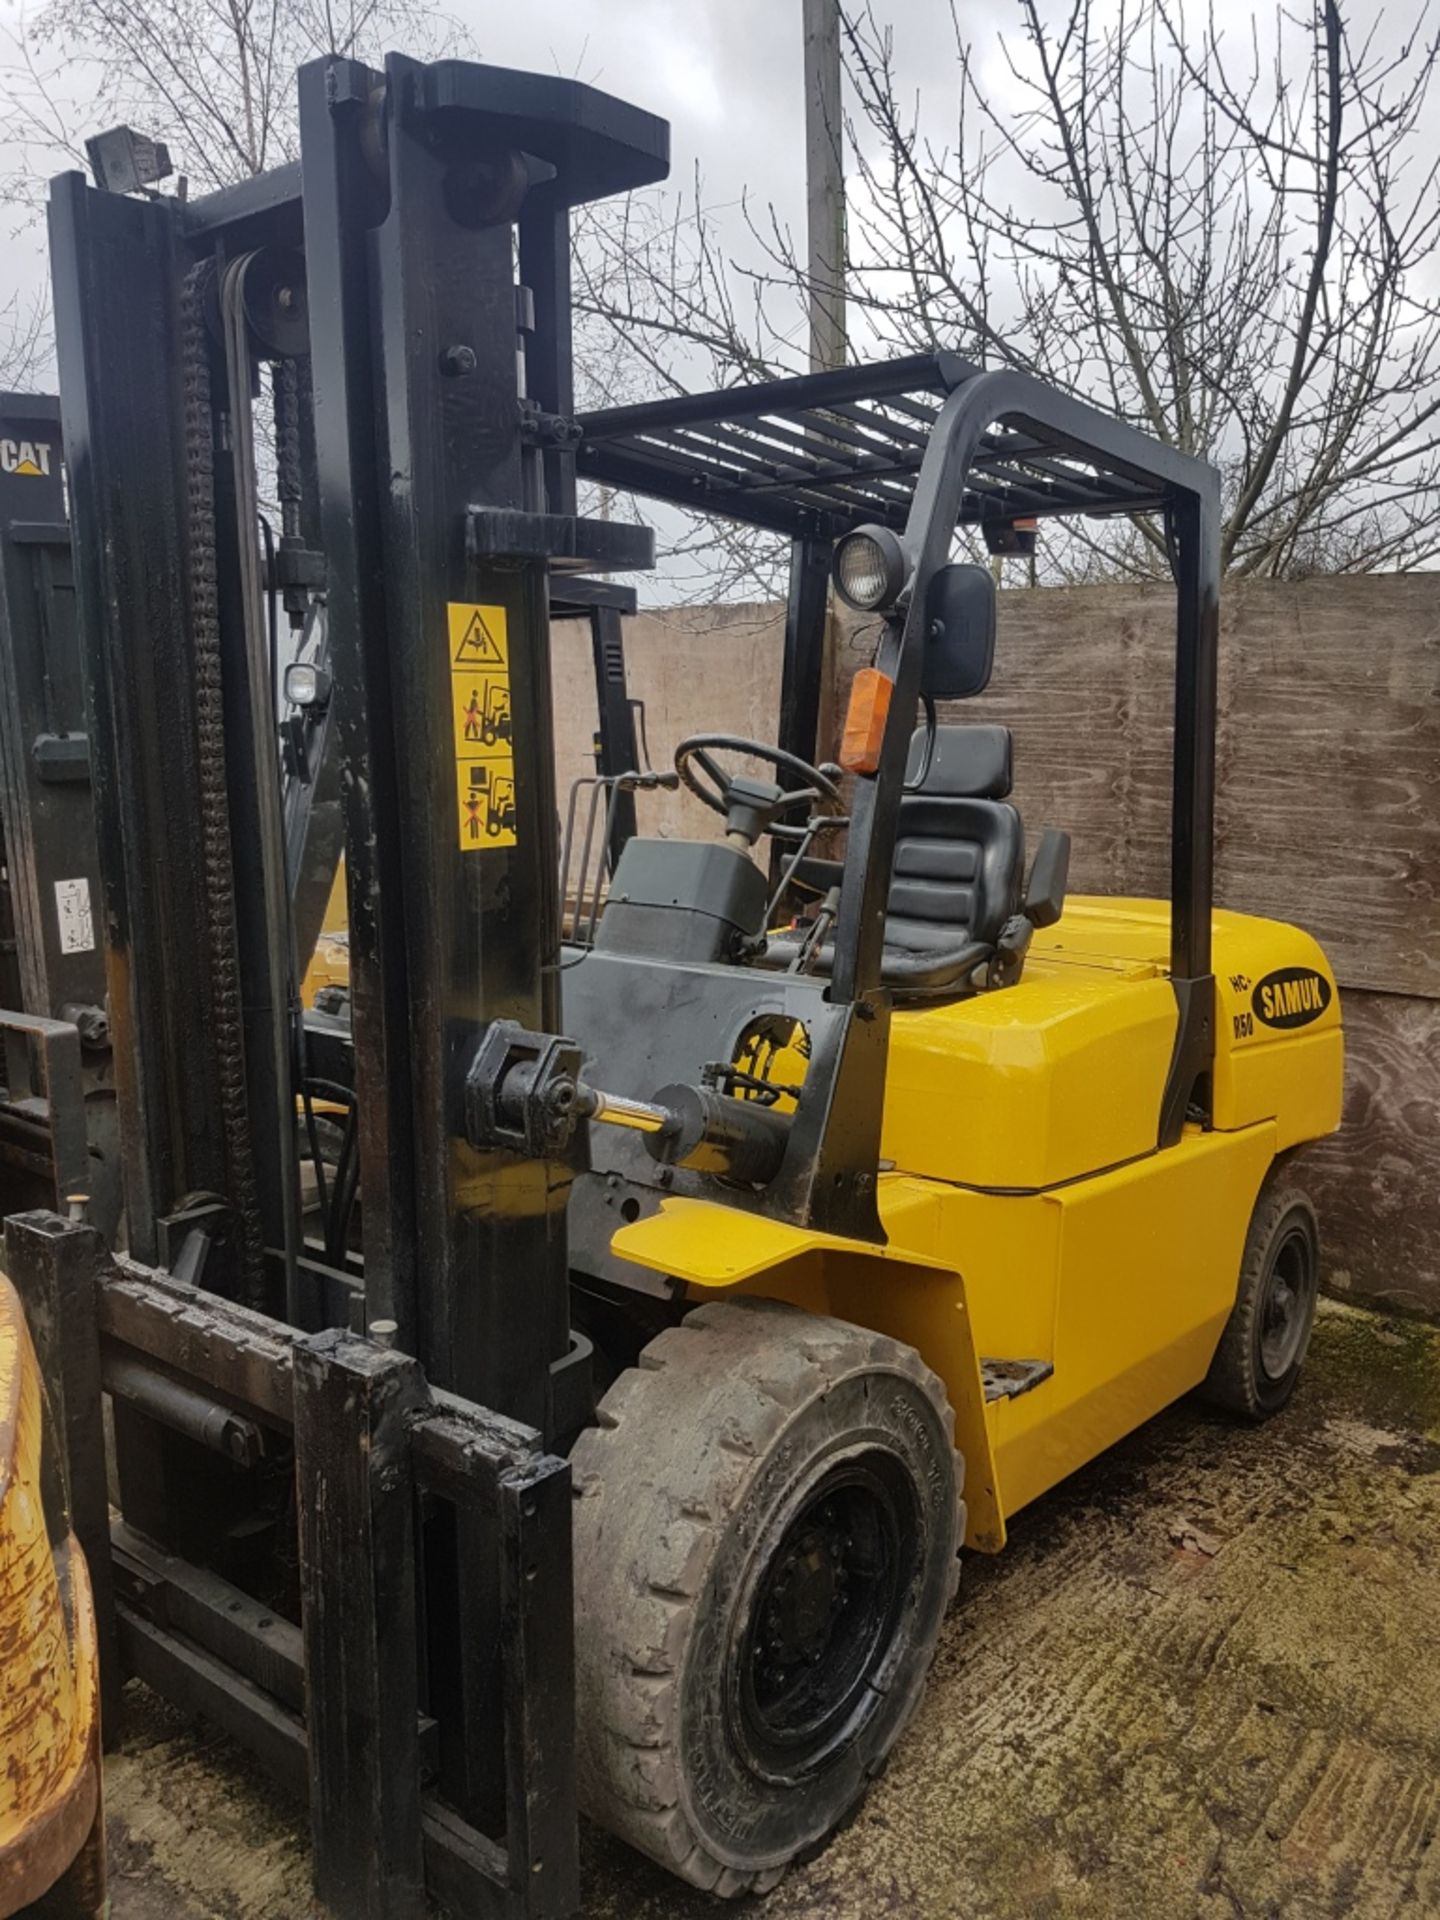 Samuk r50d 5 ton diesel forklift fitted with side shift 1400 rec hours